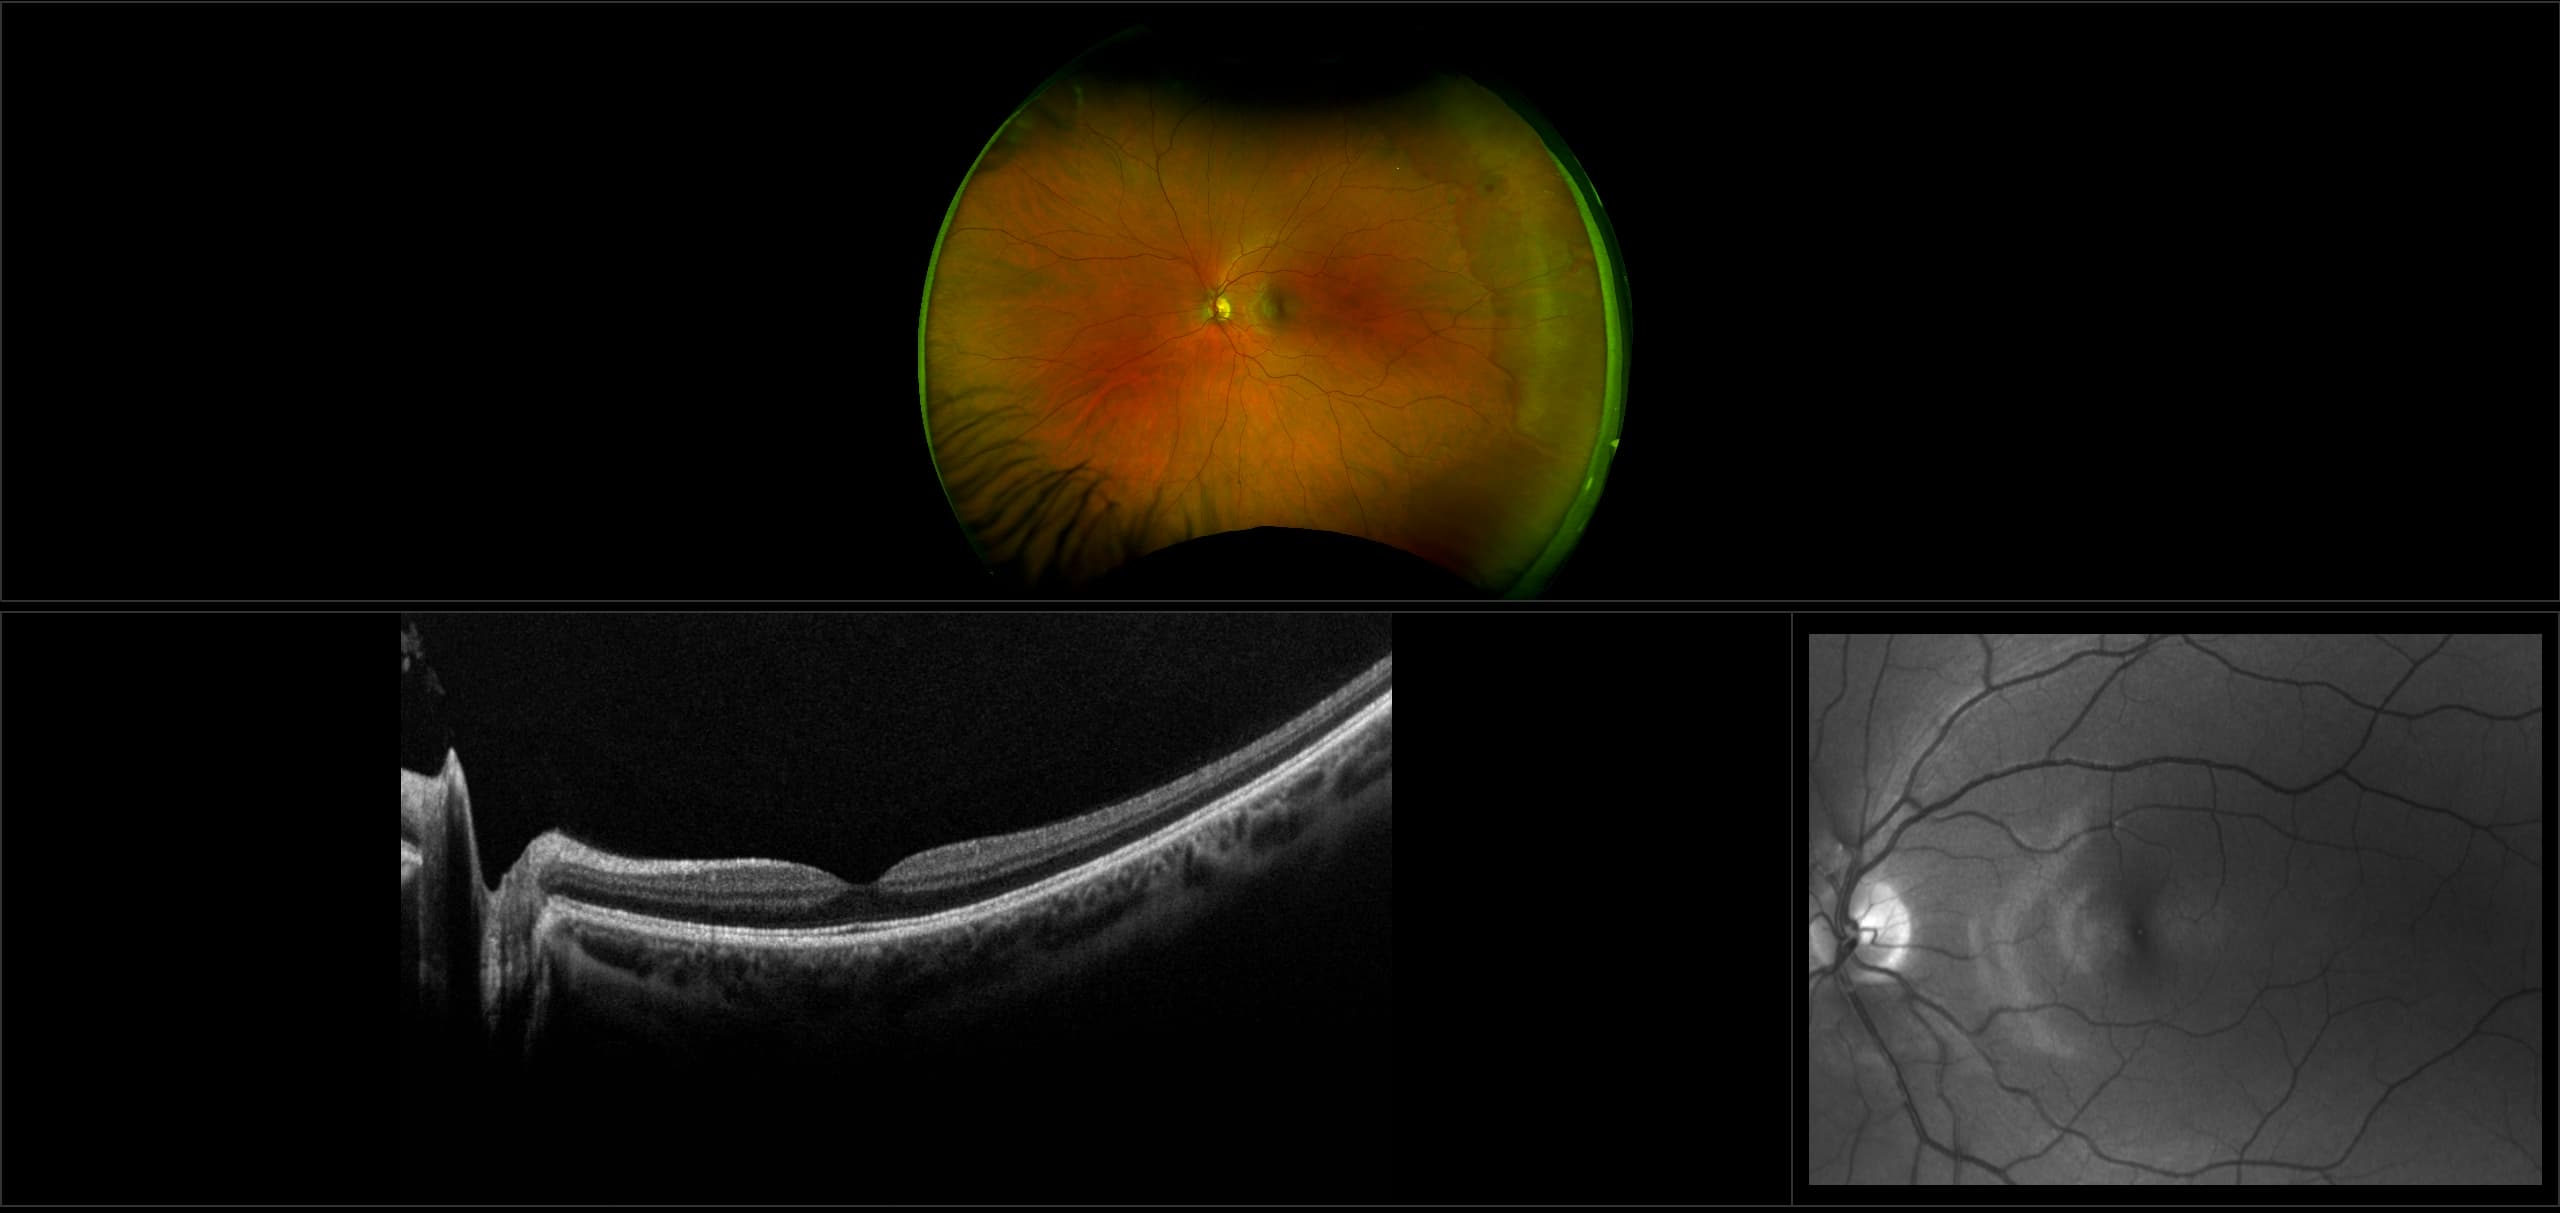 Monaco - Operculated Retinal Hole with White without Pressure (WWOP), RG, OCT